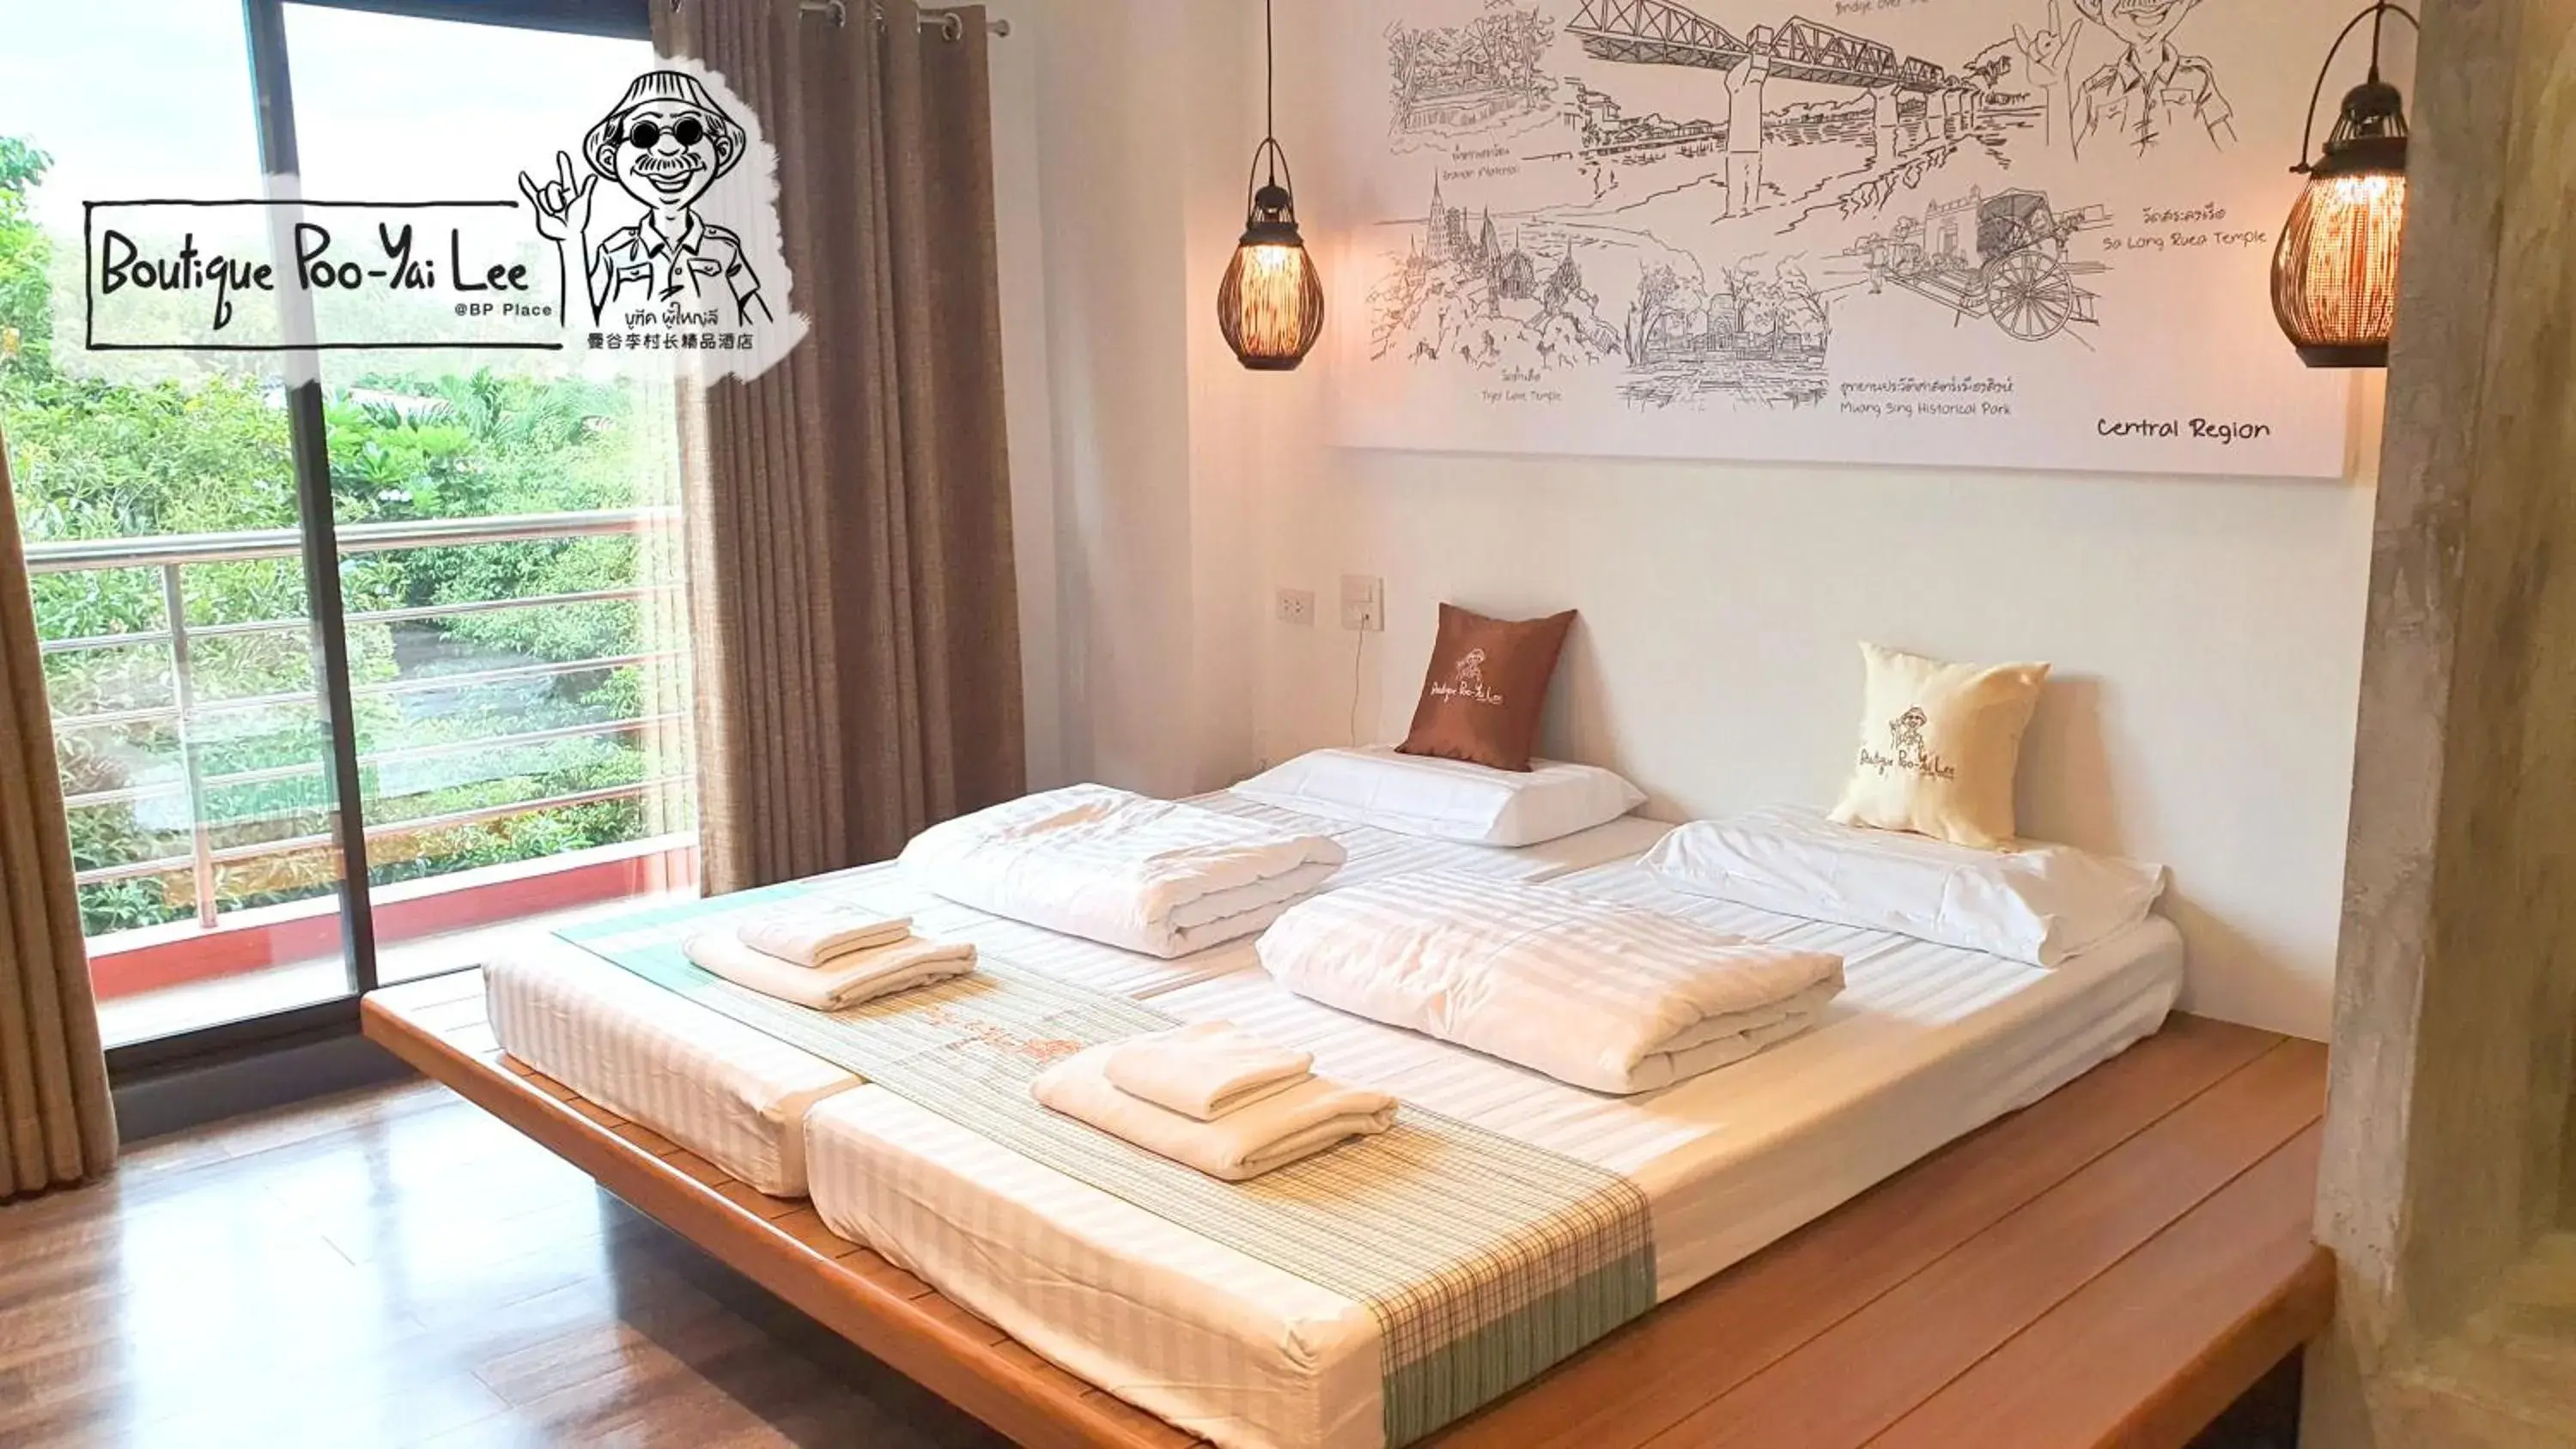 Bed in Boutique Poo-Yai Ma @ BP Place